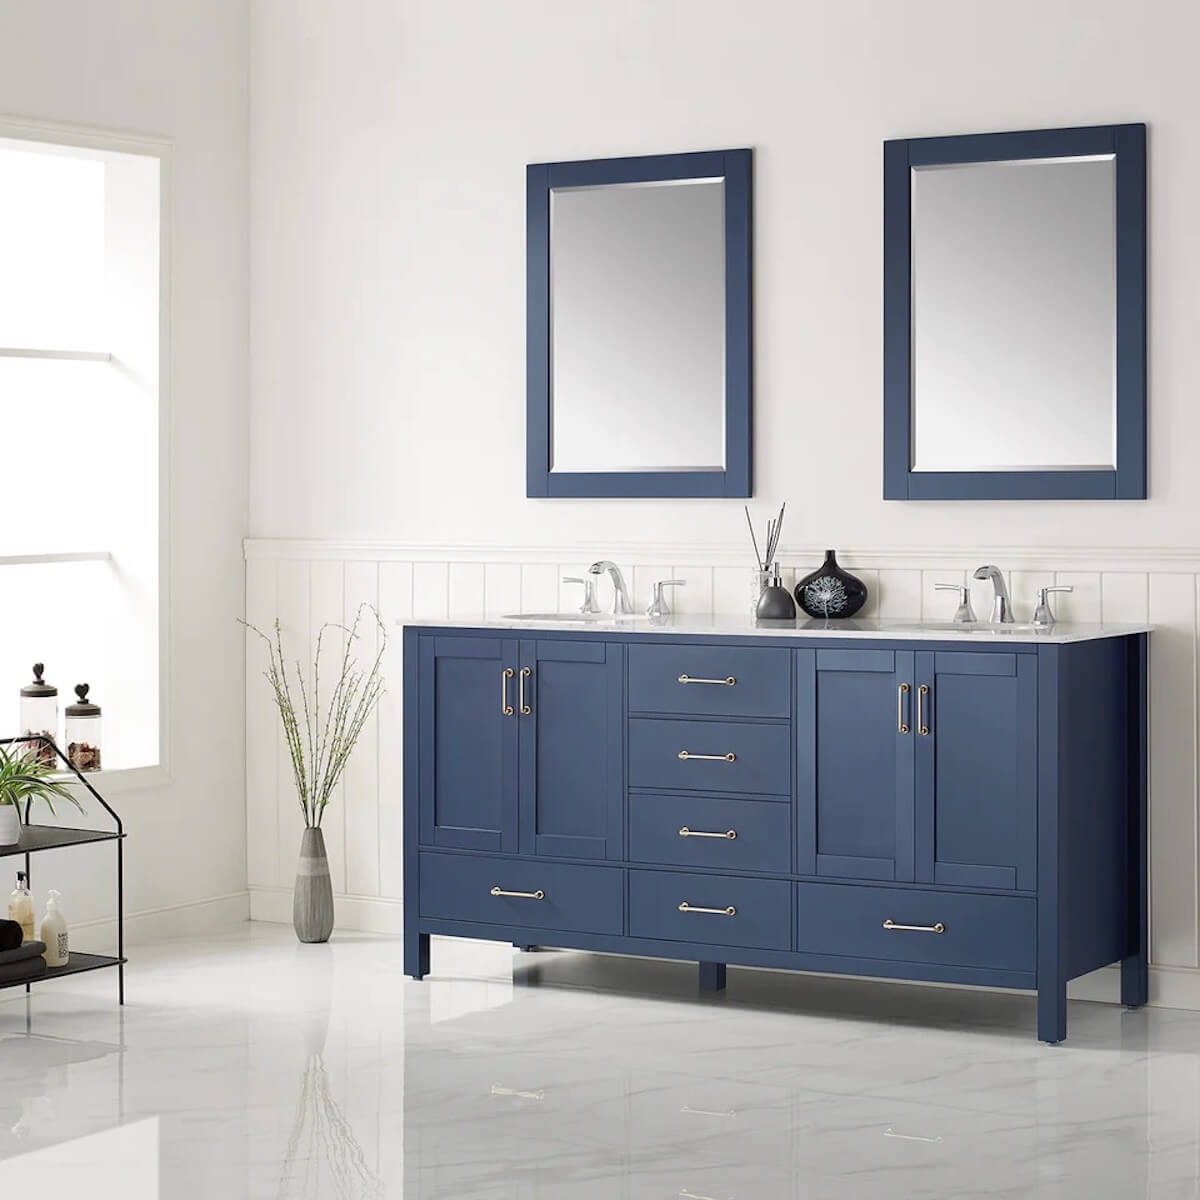 Vinnova 72” Gela Royal Blue Freestanding Double Vanity with Carrara White Marble Countertop With Mirror Side 723072-RB-CA